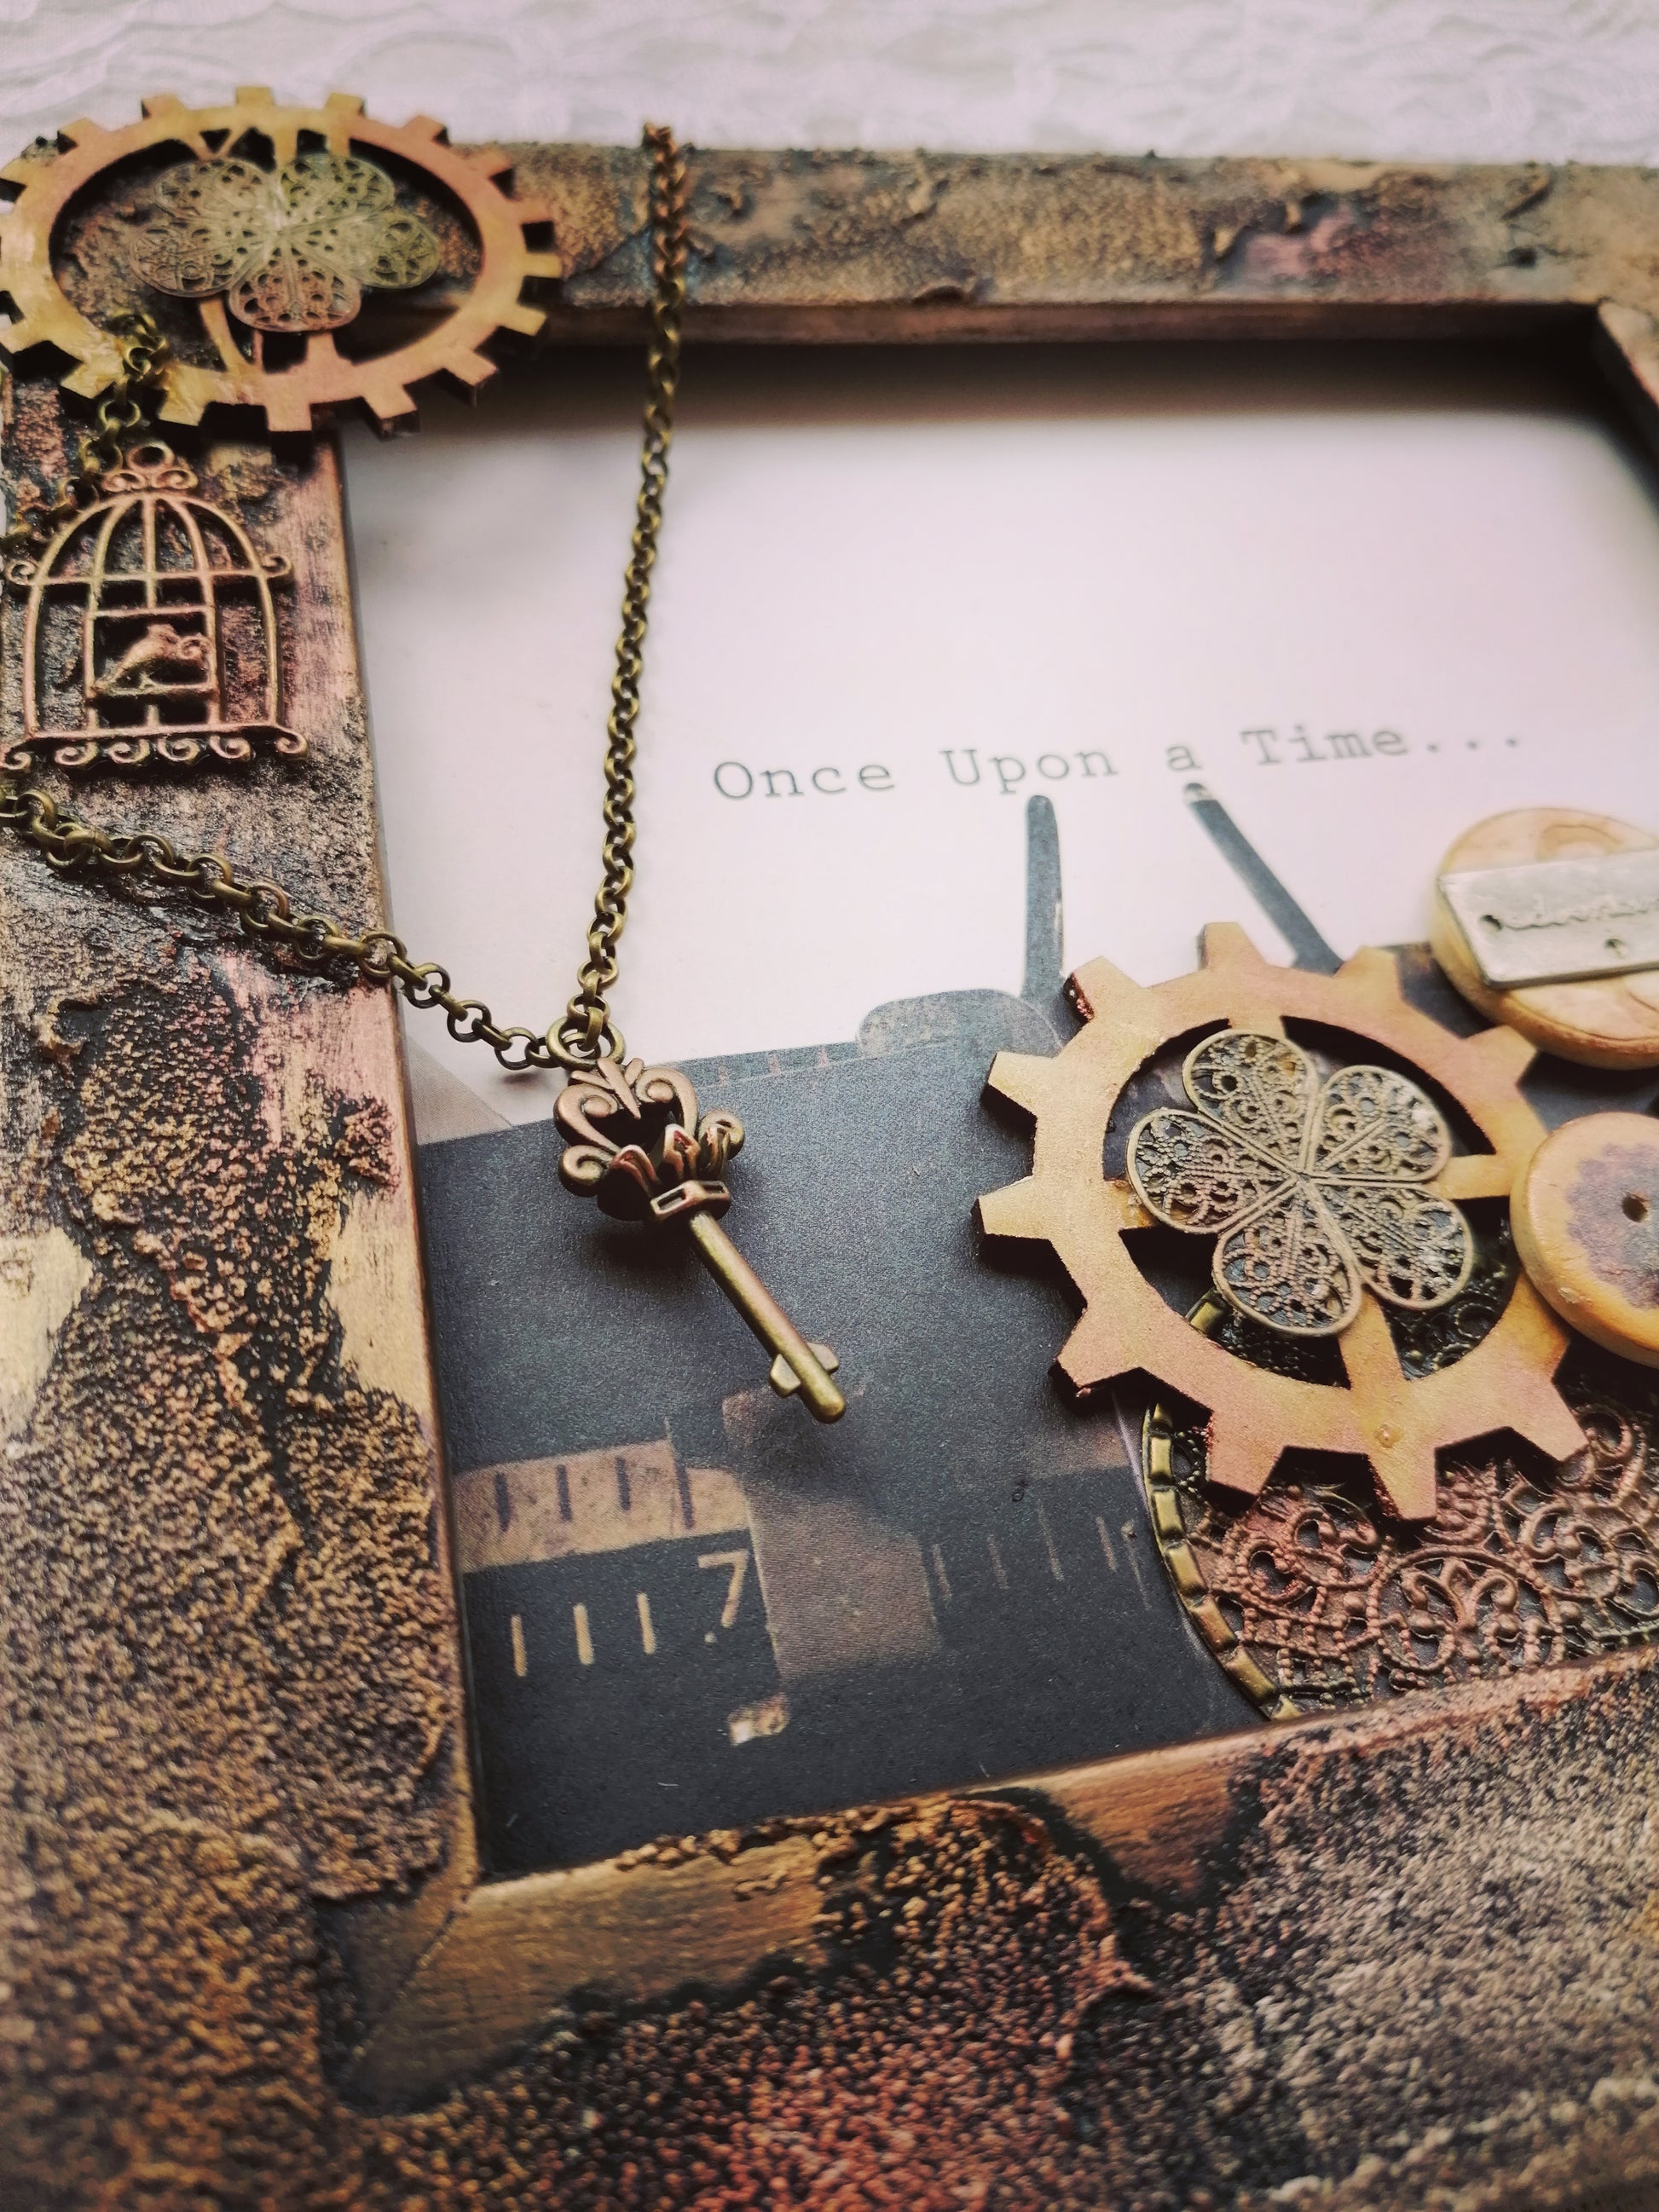 Album Foto Steampunk ”Once Upon A Time”